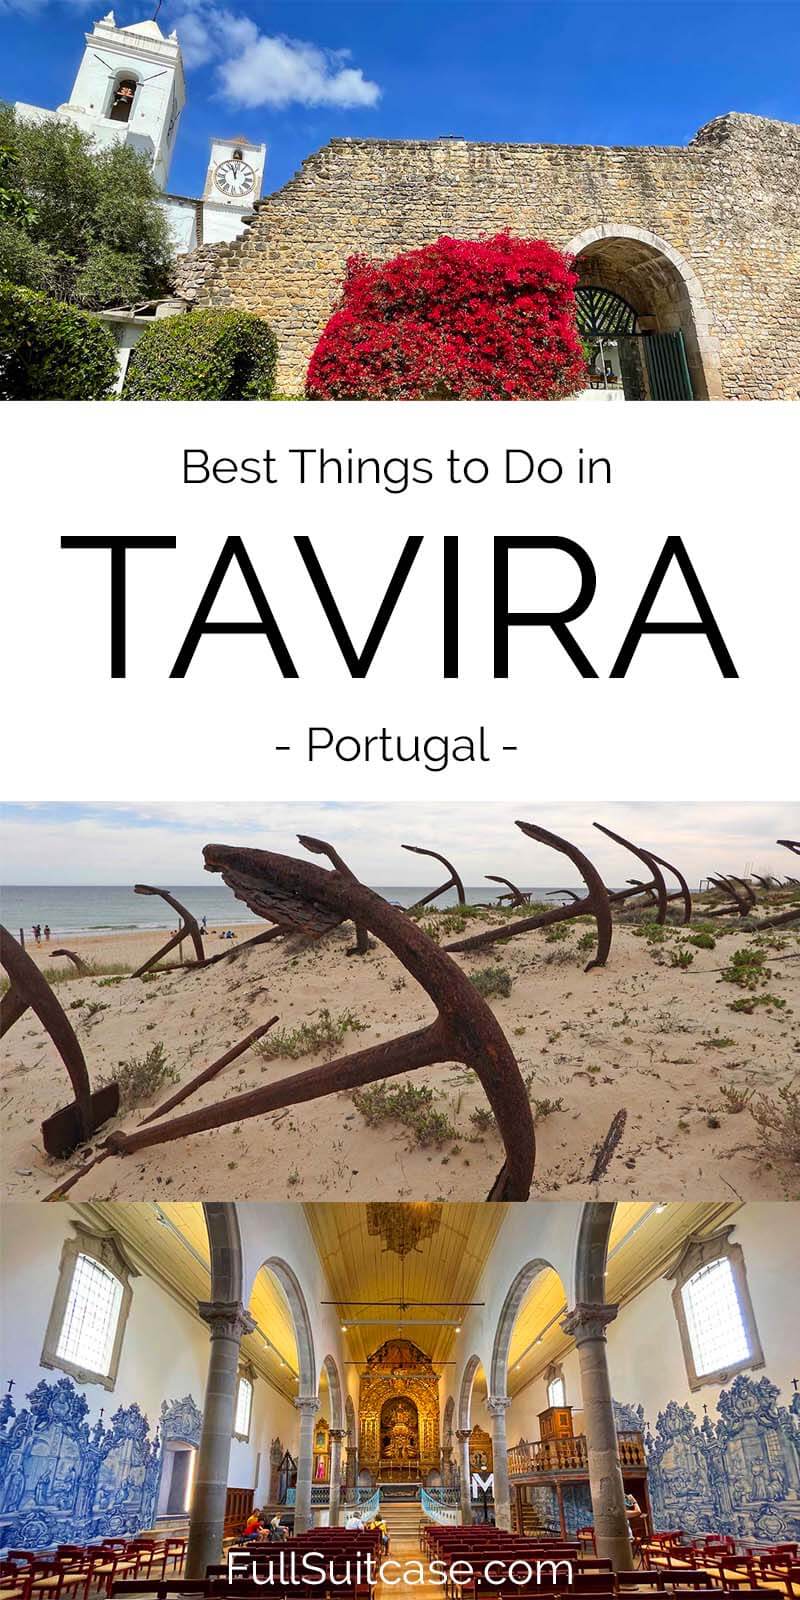 Top places to see and best things to do in Tavira town in Portugal